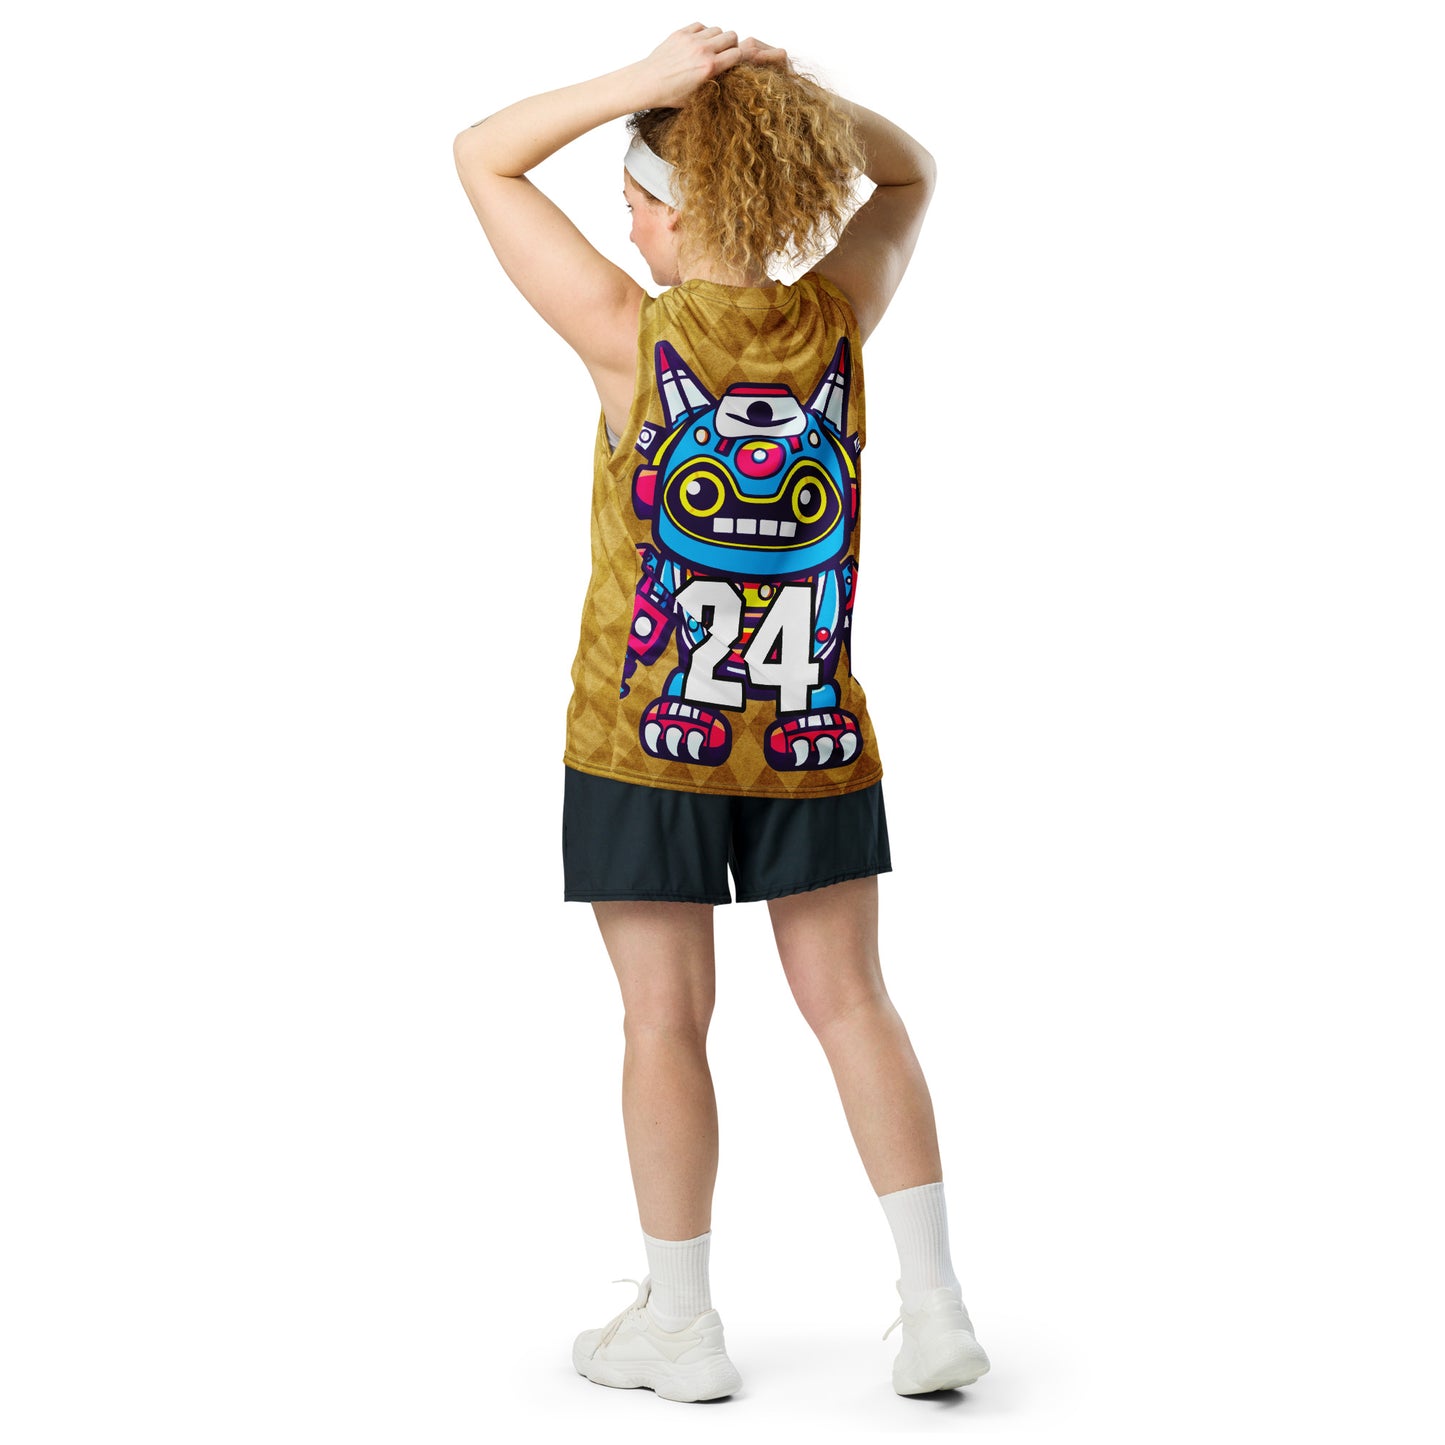 Techno Guardian - Recycled unisex basketball jersey - Golden Argyle Colorway